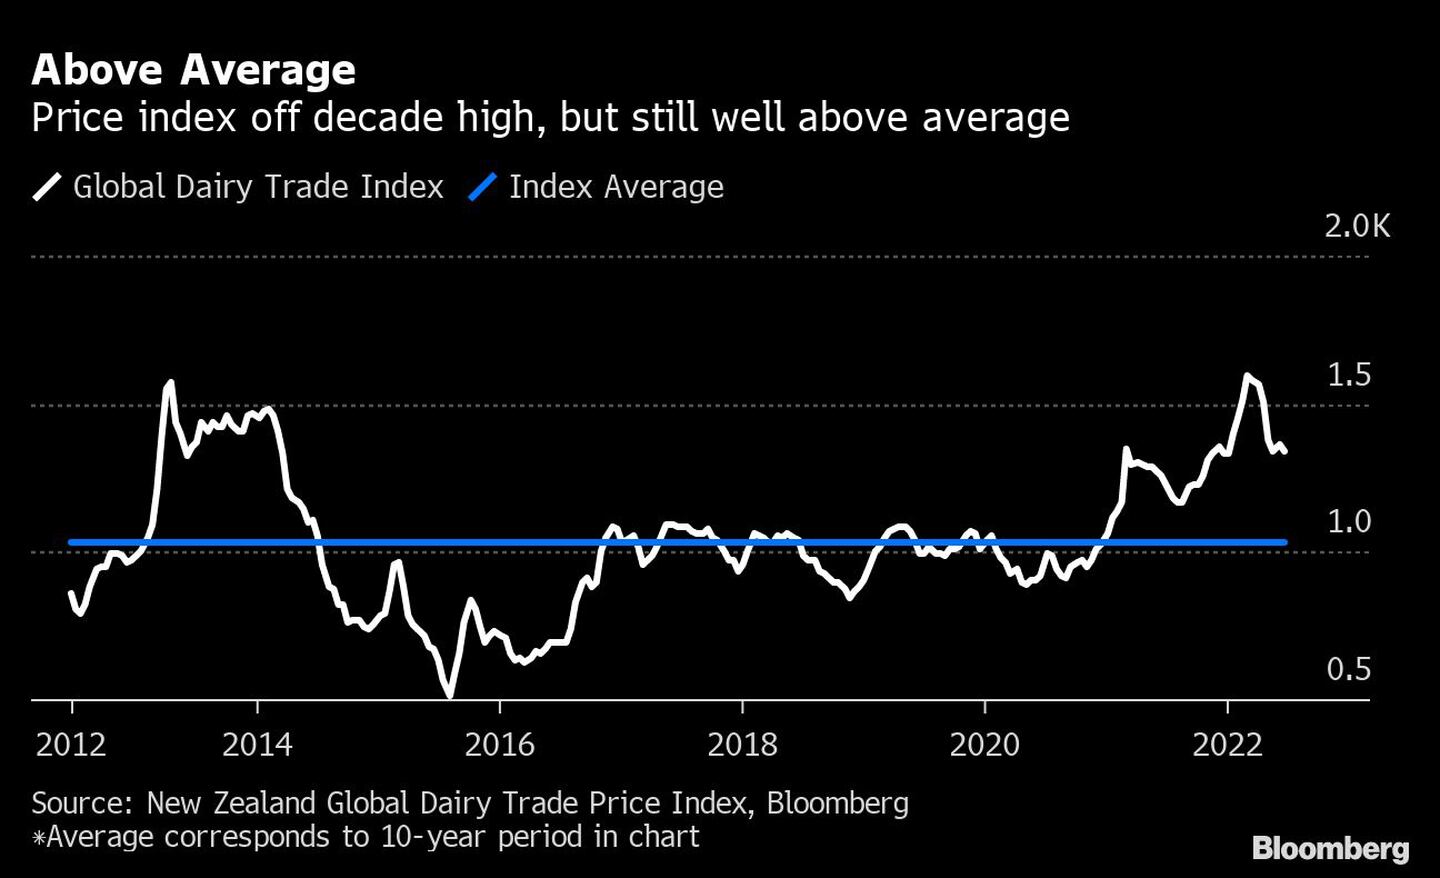 Above Average | Price index off decade high, but still well above averagedfd